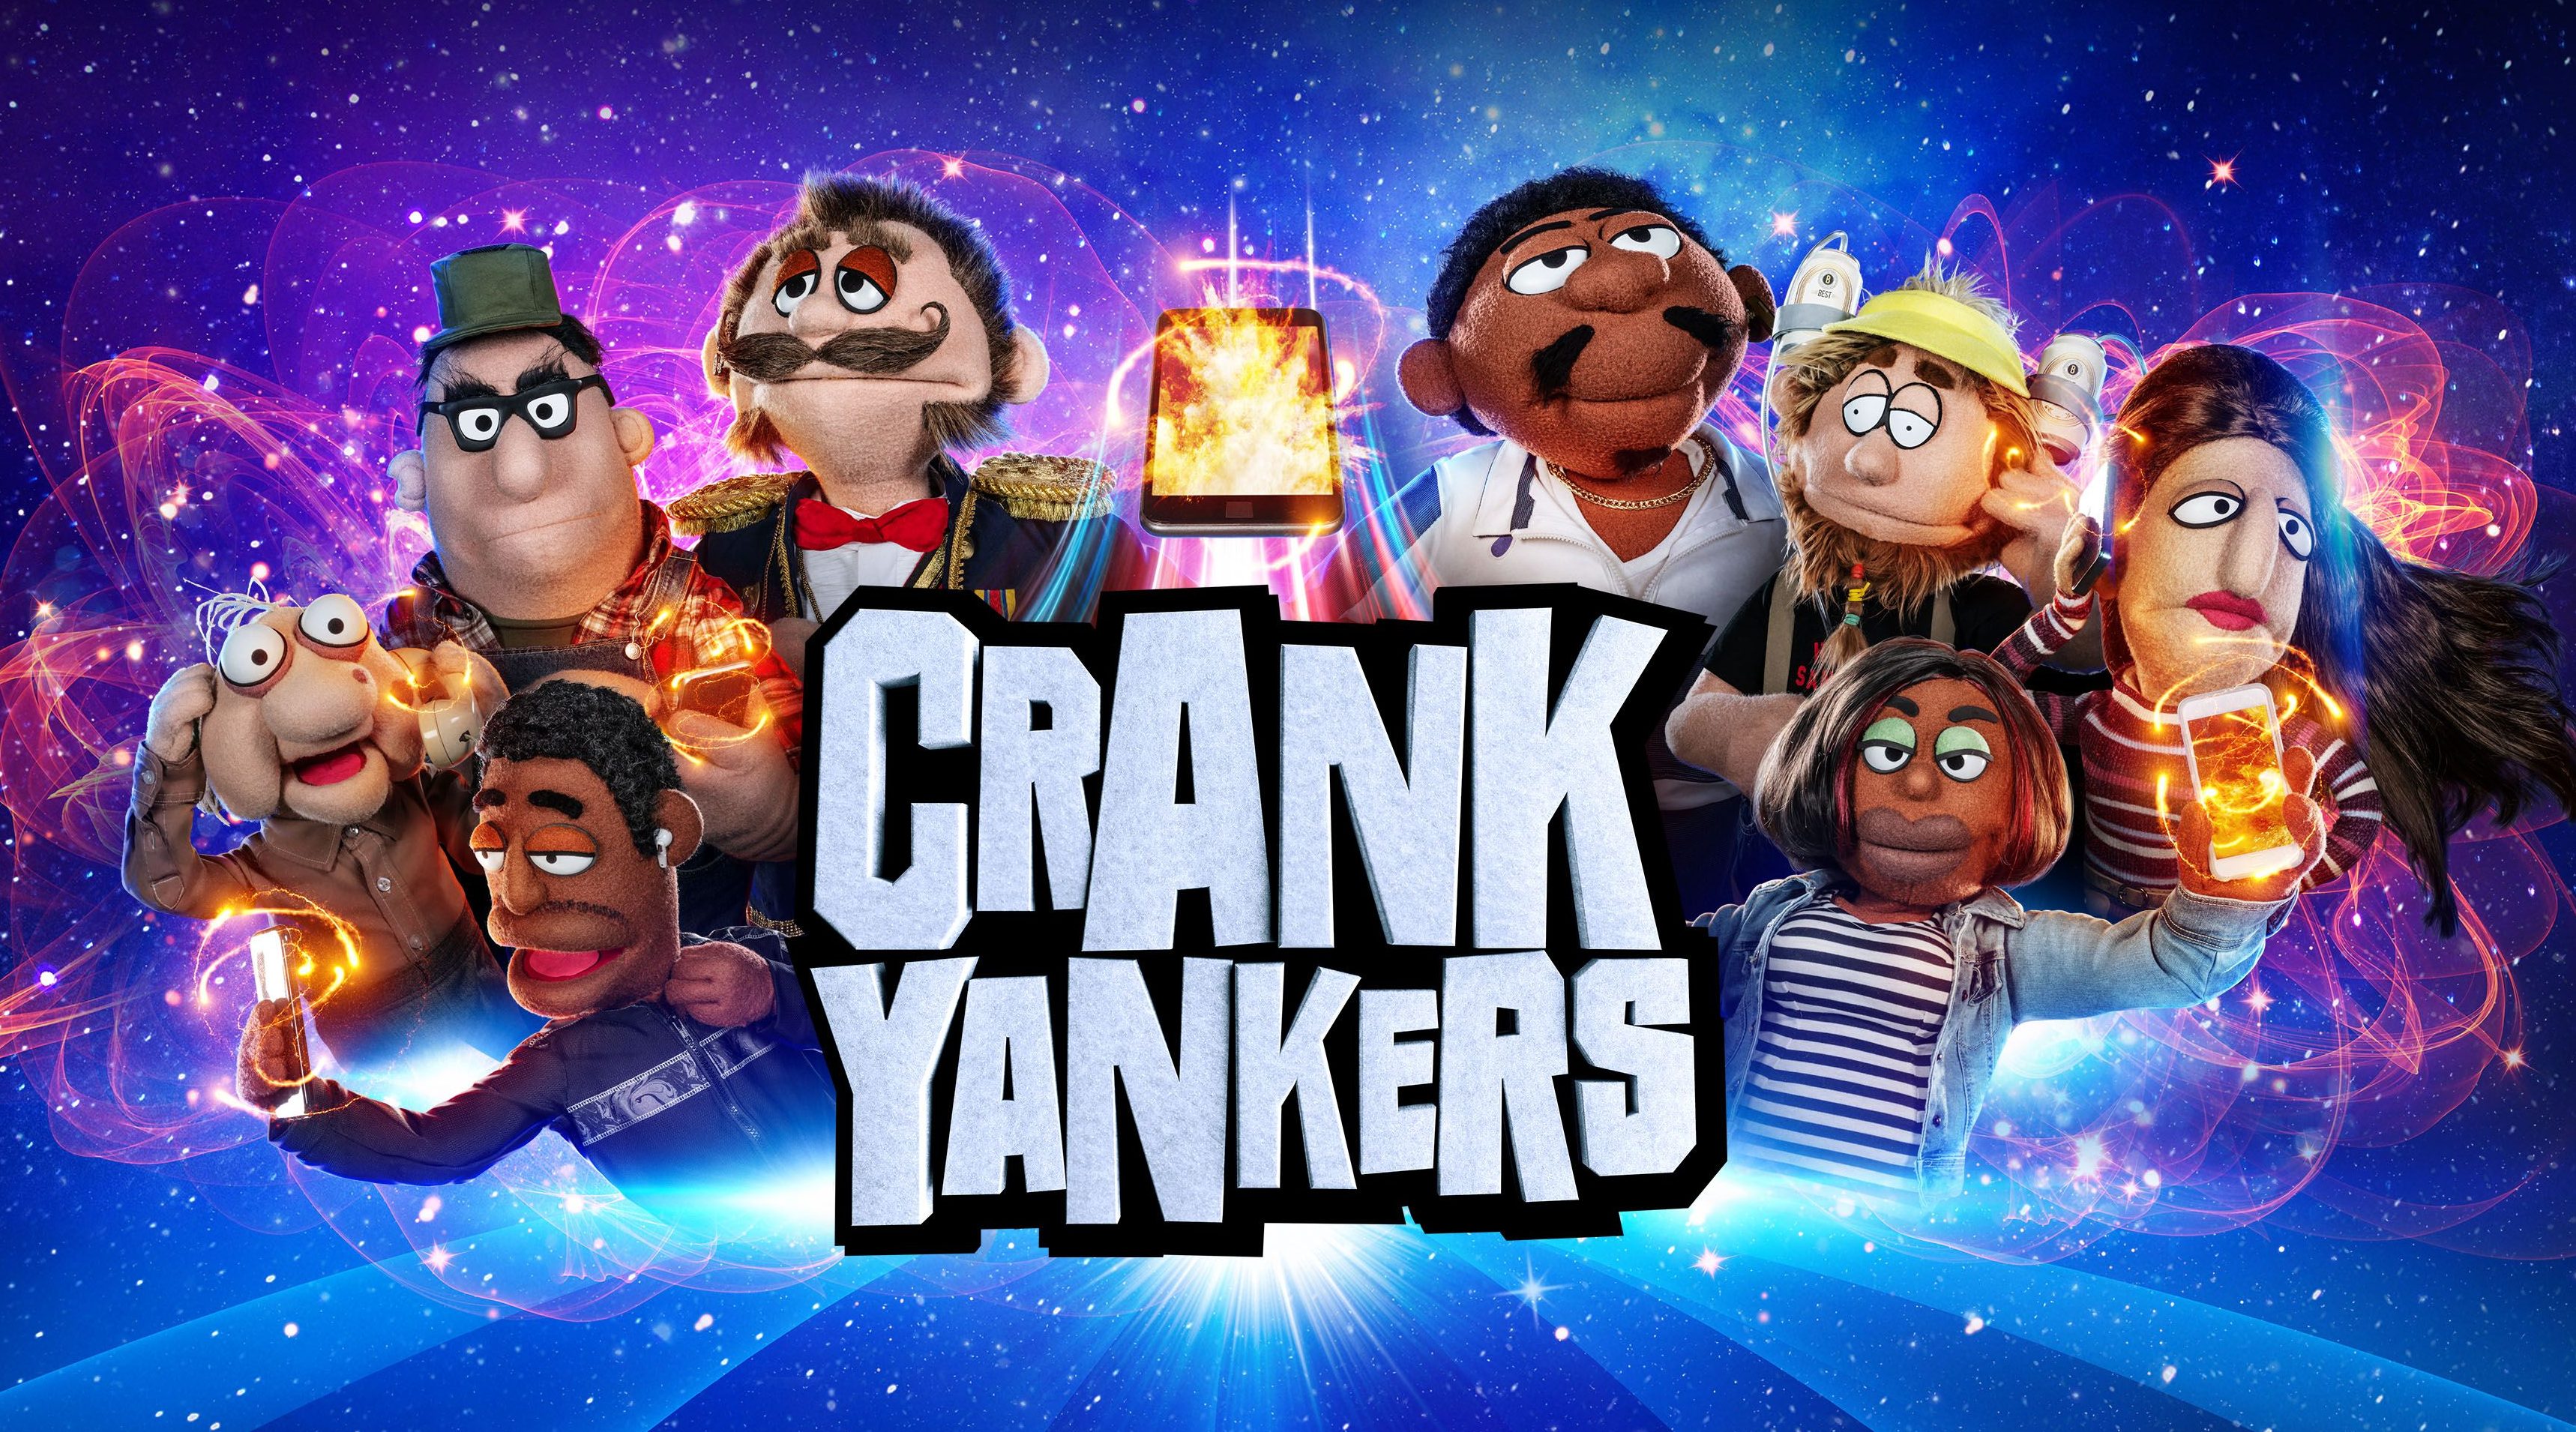 How to Watch 'Crank Yankers' Online Without Cable